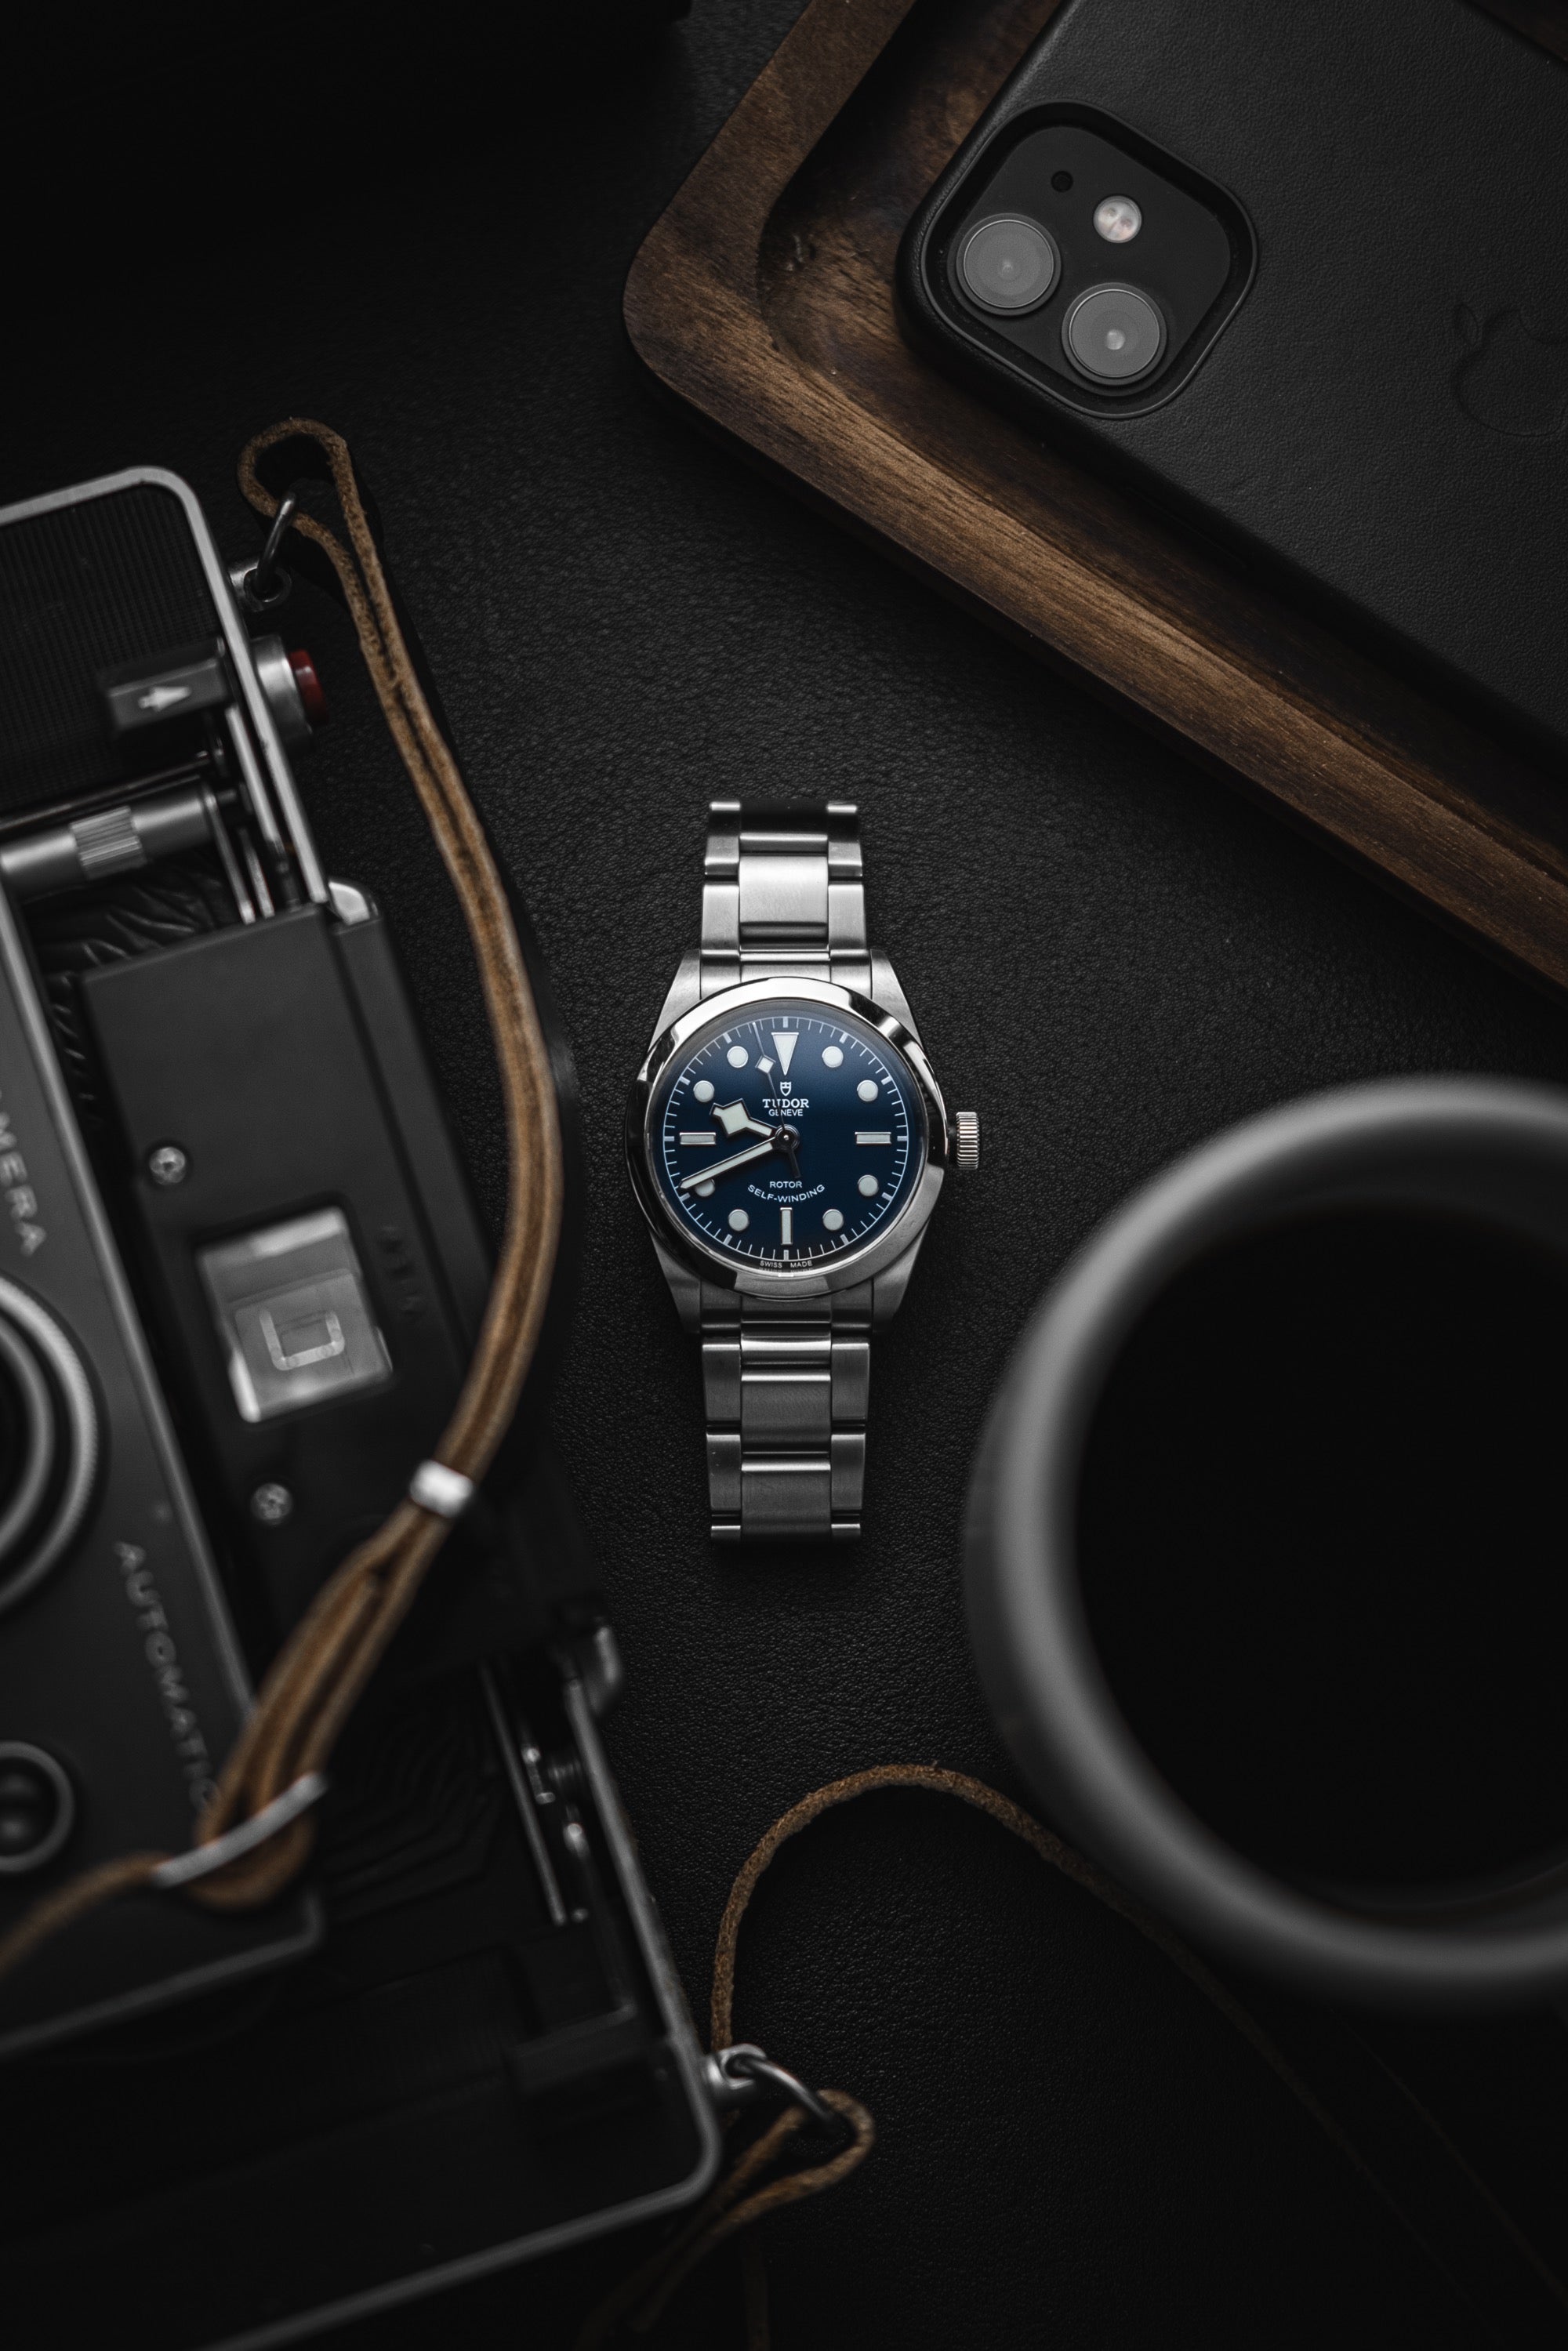 6 tips to improve your watch photography flatlays